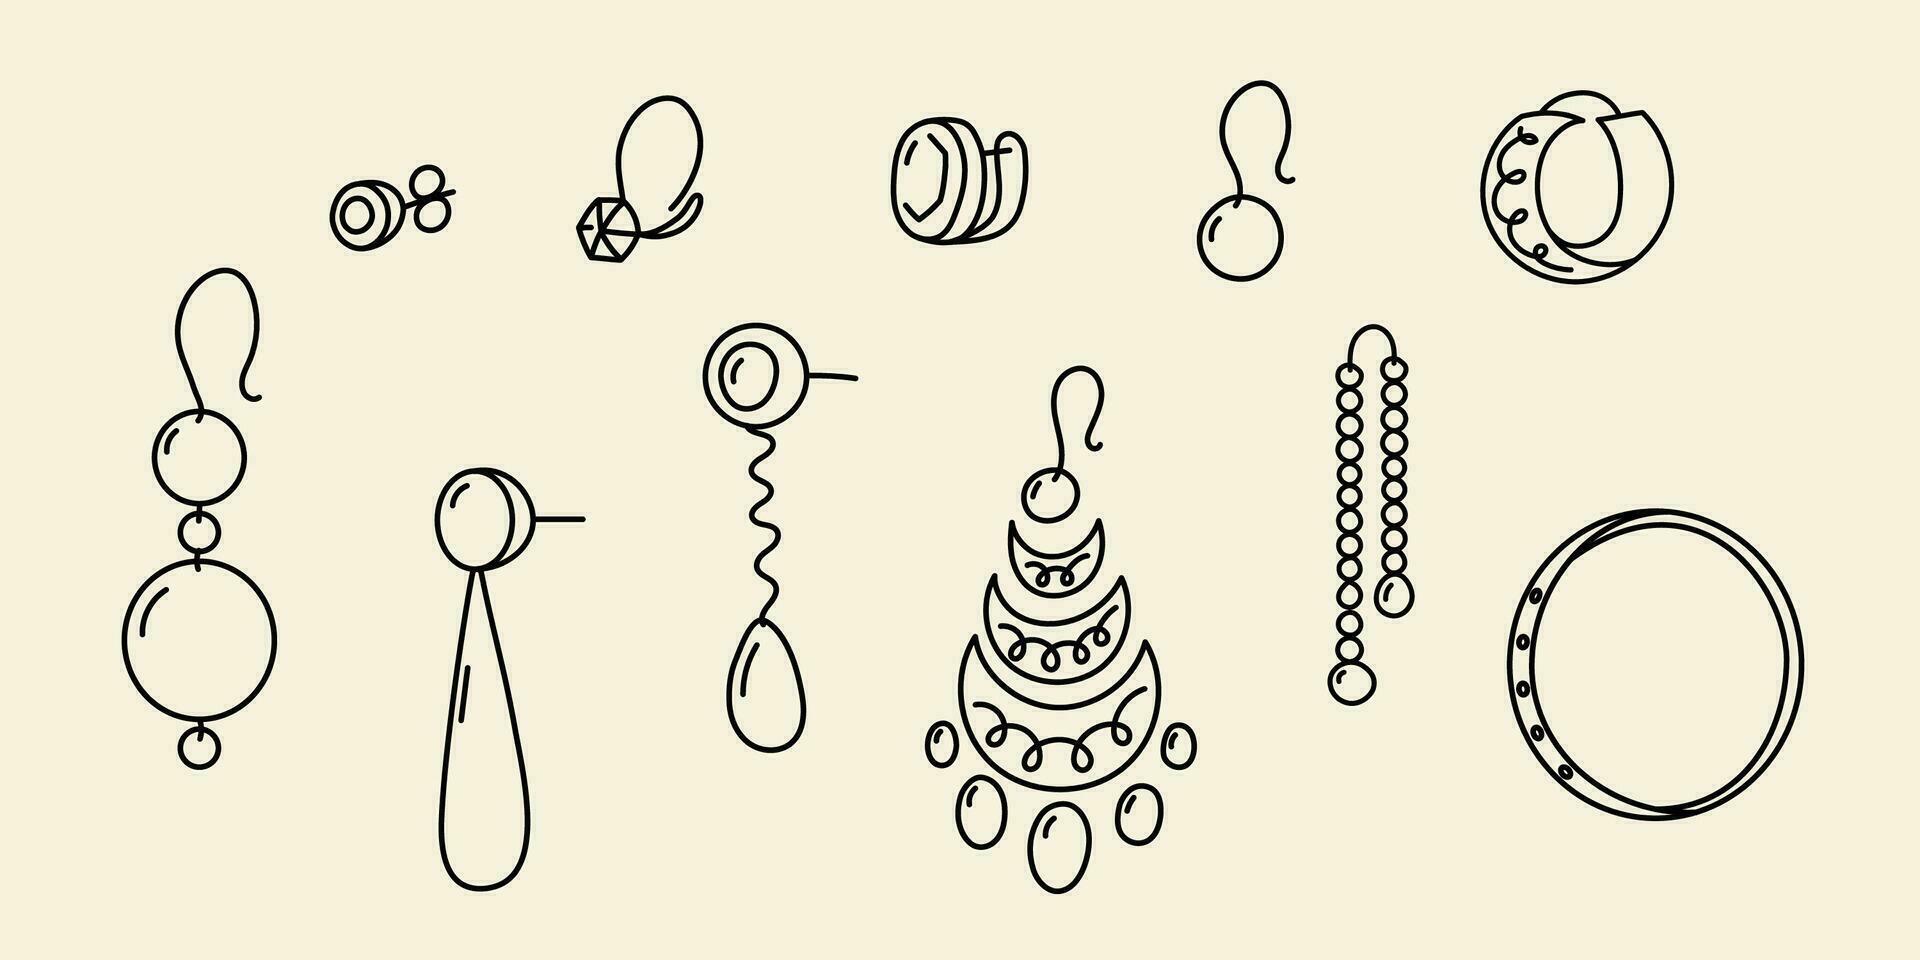 Doodle earrings drawing set. Different types of hand drawn woman jewelry. Outline vector illustration isolated on removable beige background.